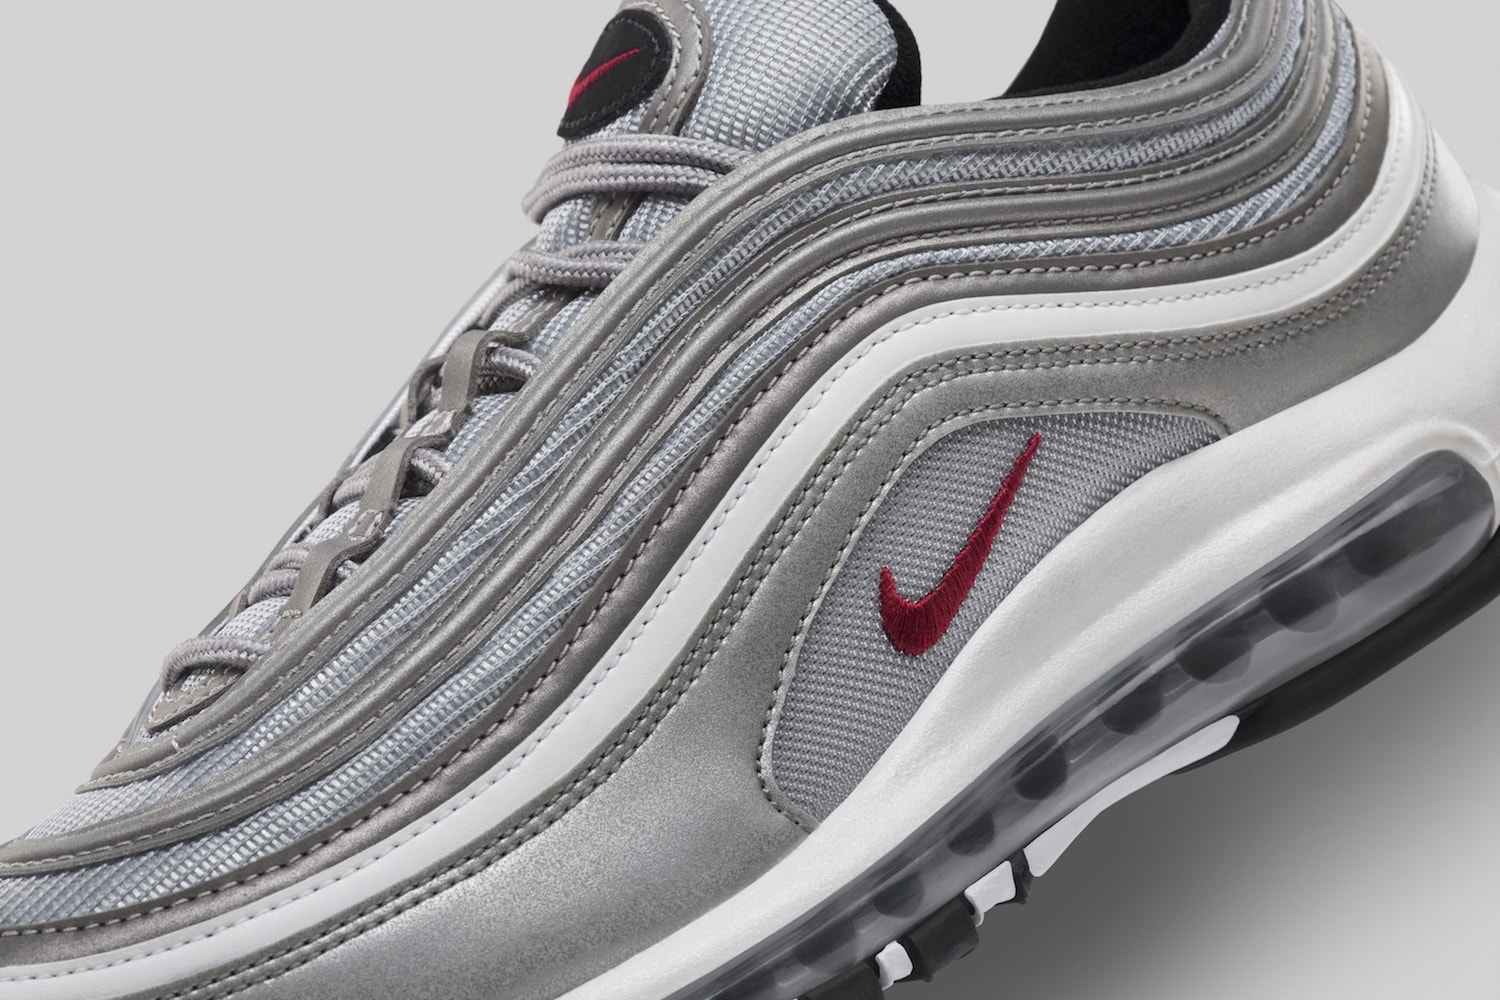 Nike Air Max 97 "Silver" Italy Milan Event